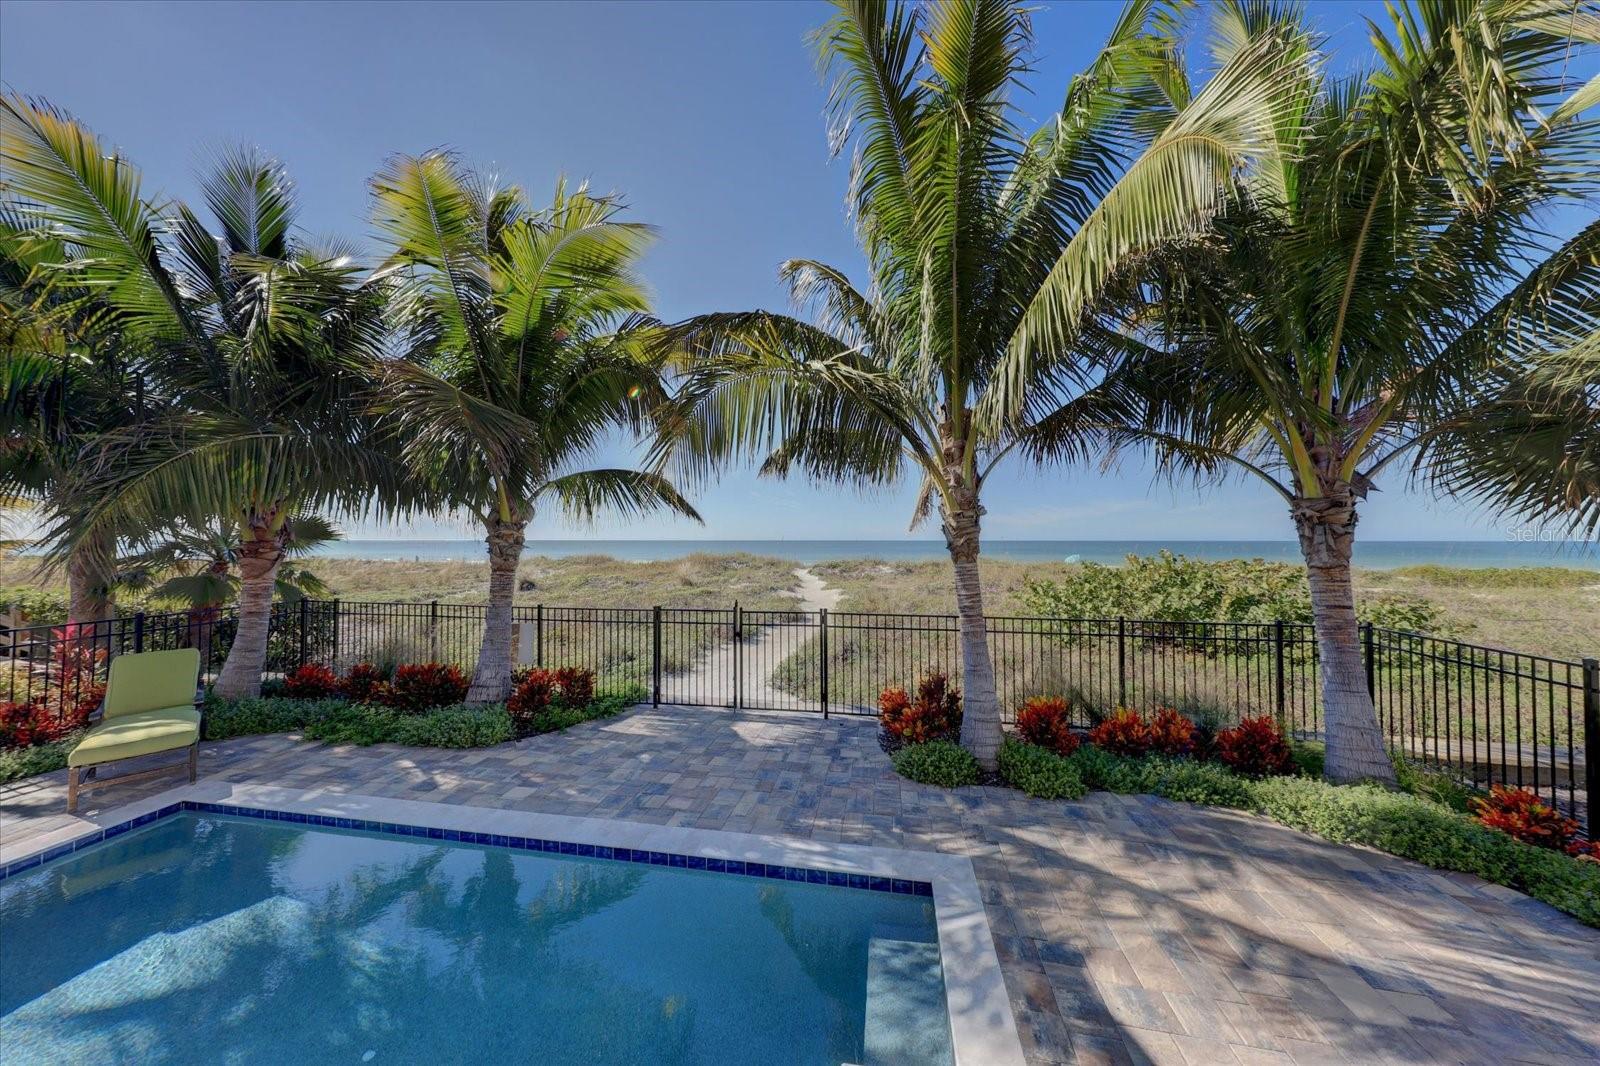 Backyard with Private Path to the Beach